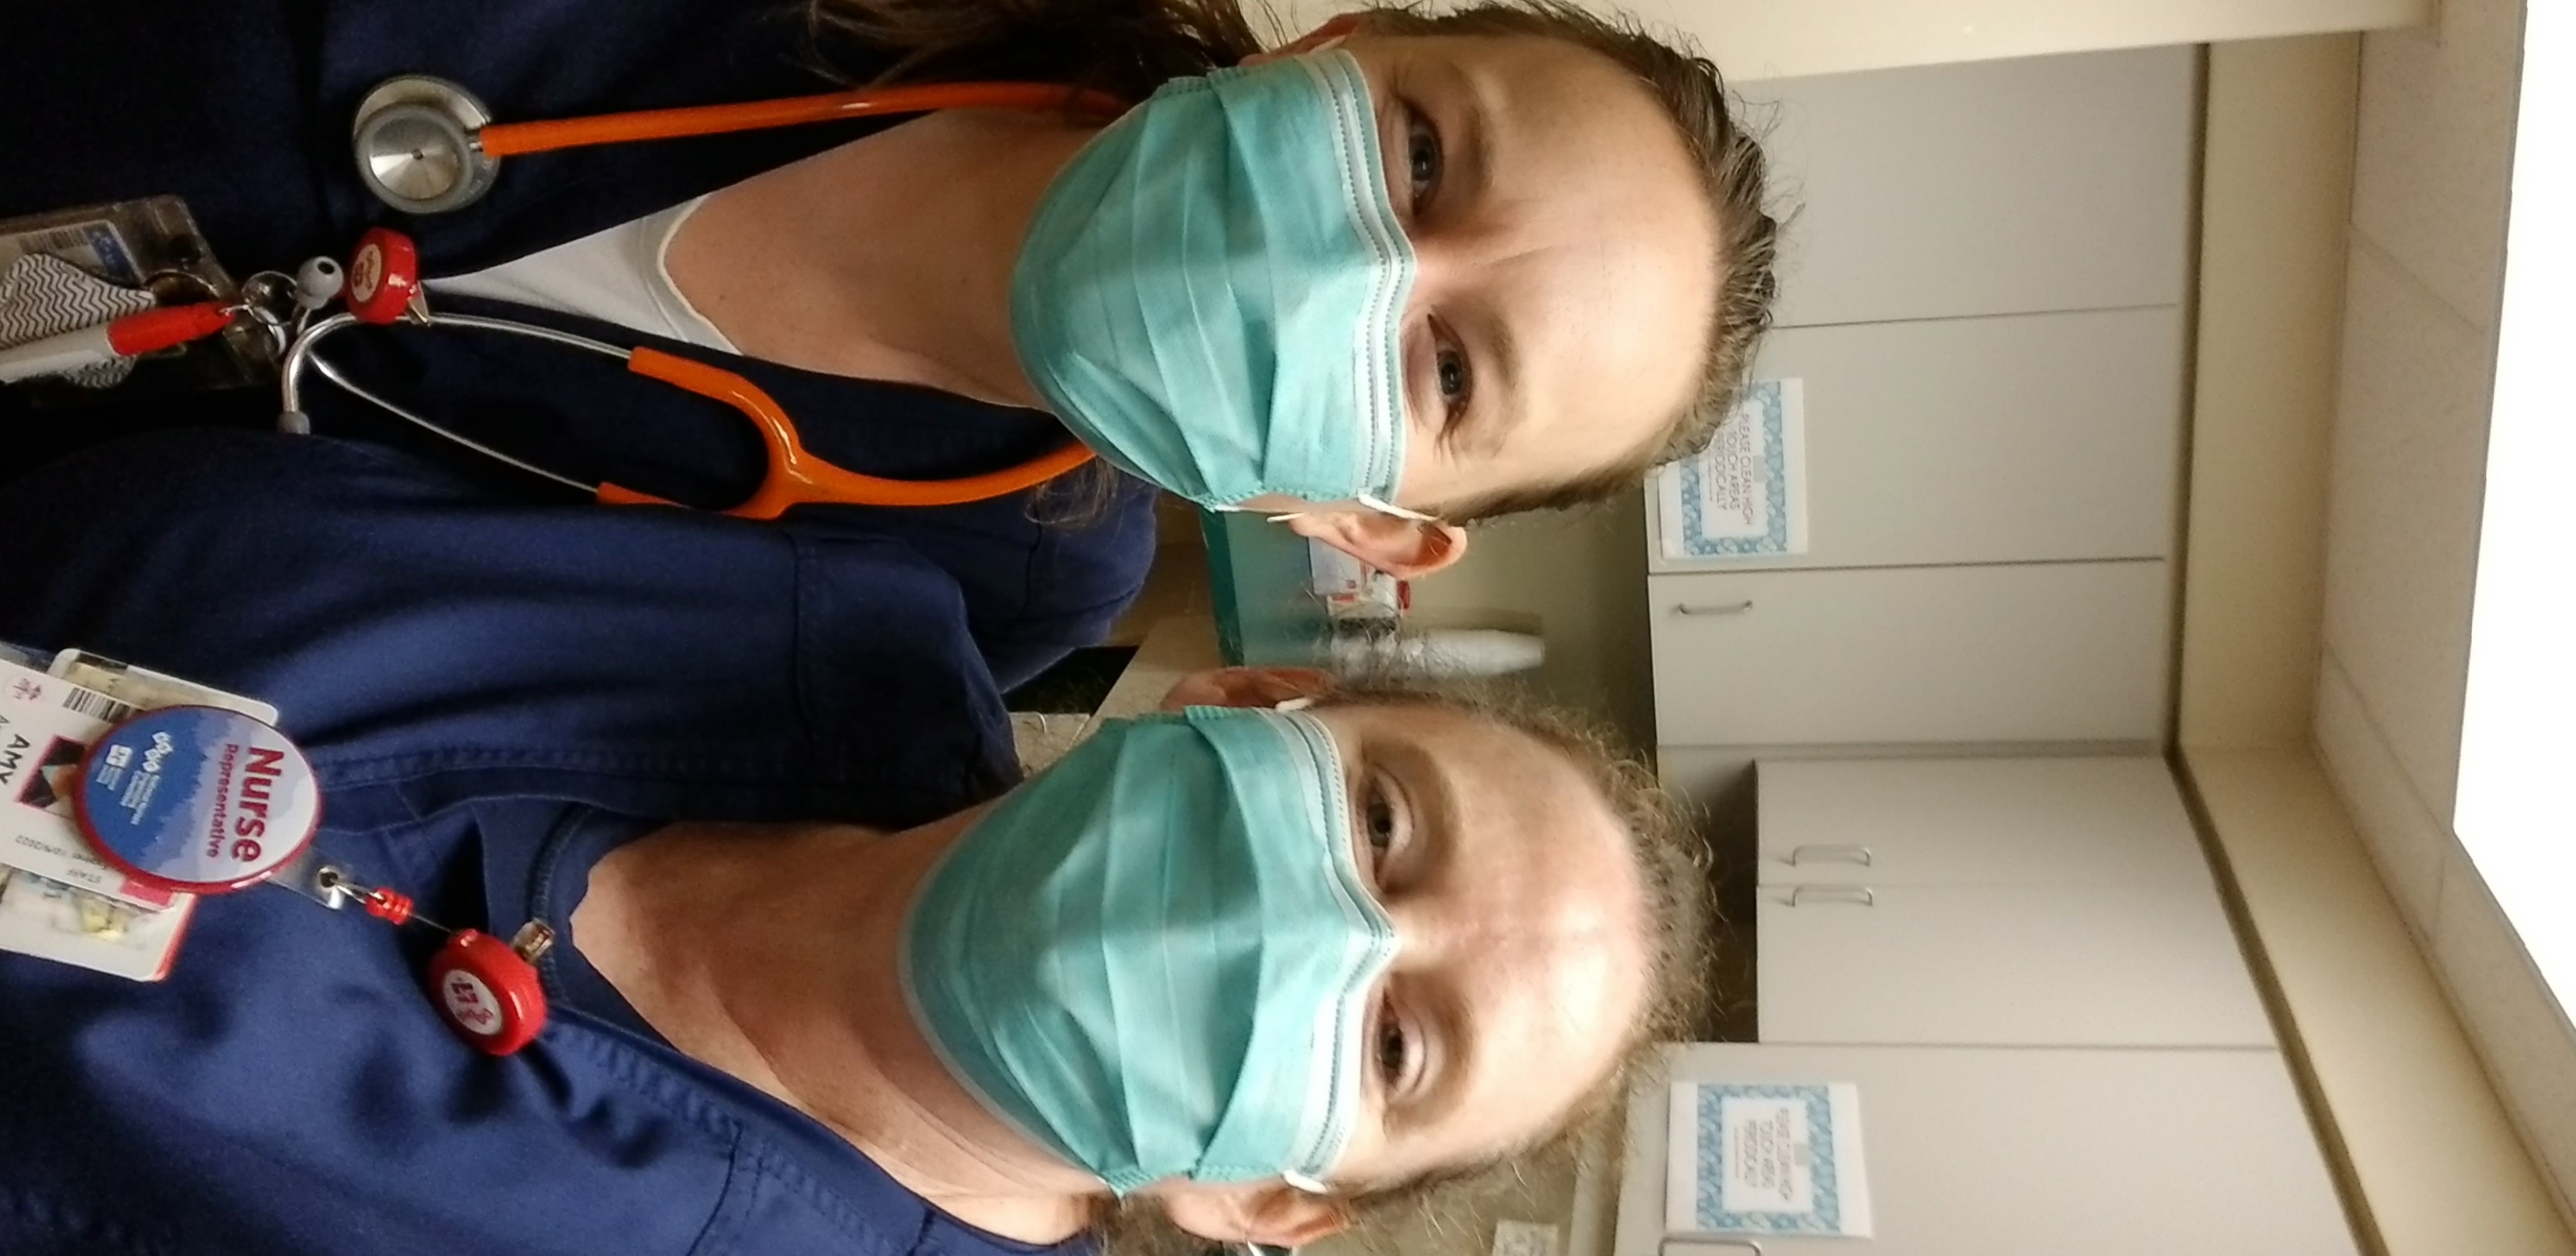 Amy Waters is pictured on the left with another nurse to her right. They are taking a selfie photo with masks and scrubs.